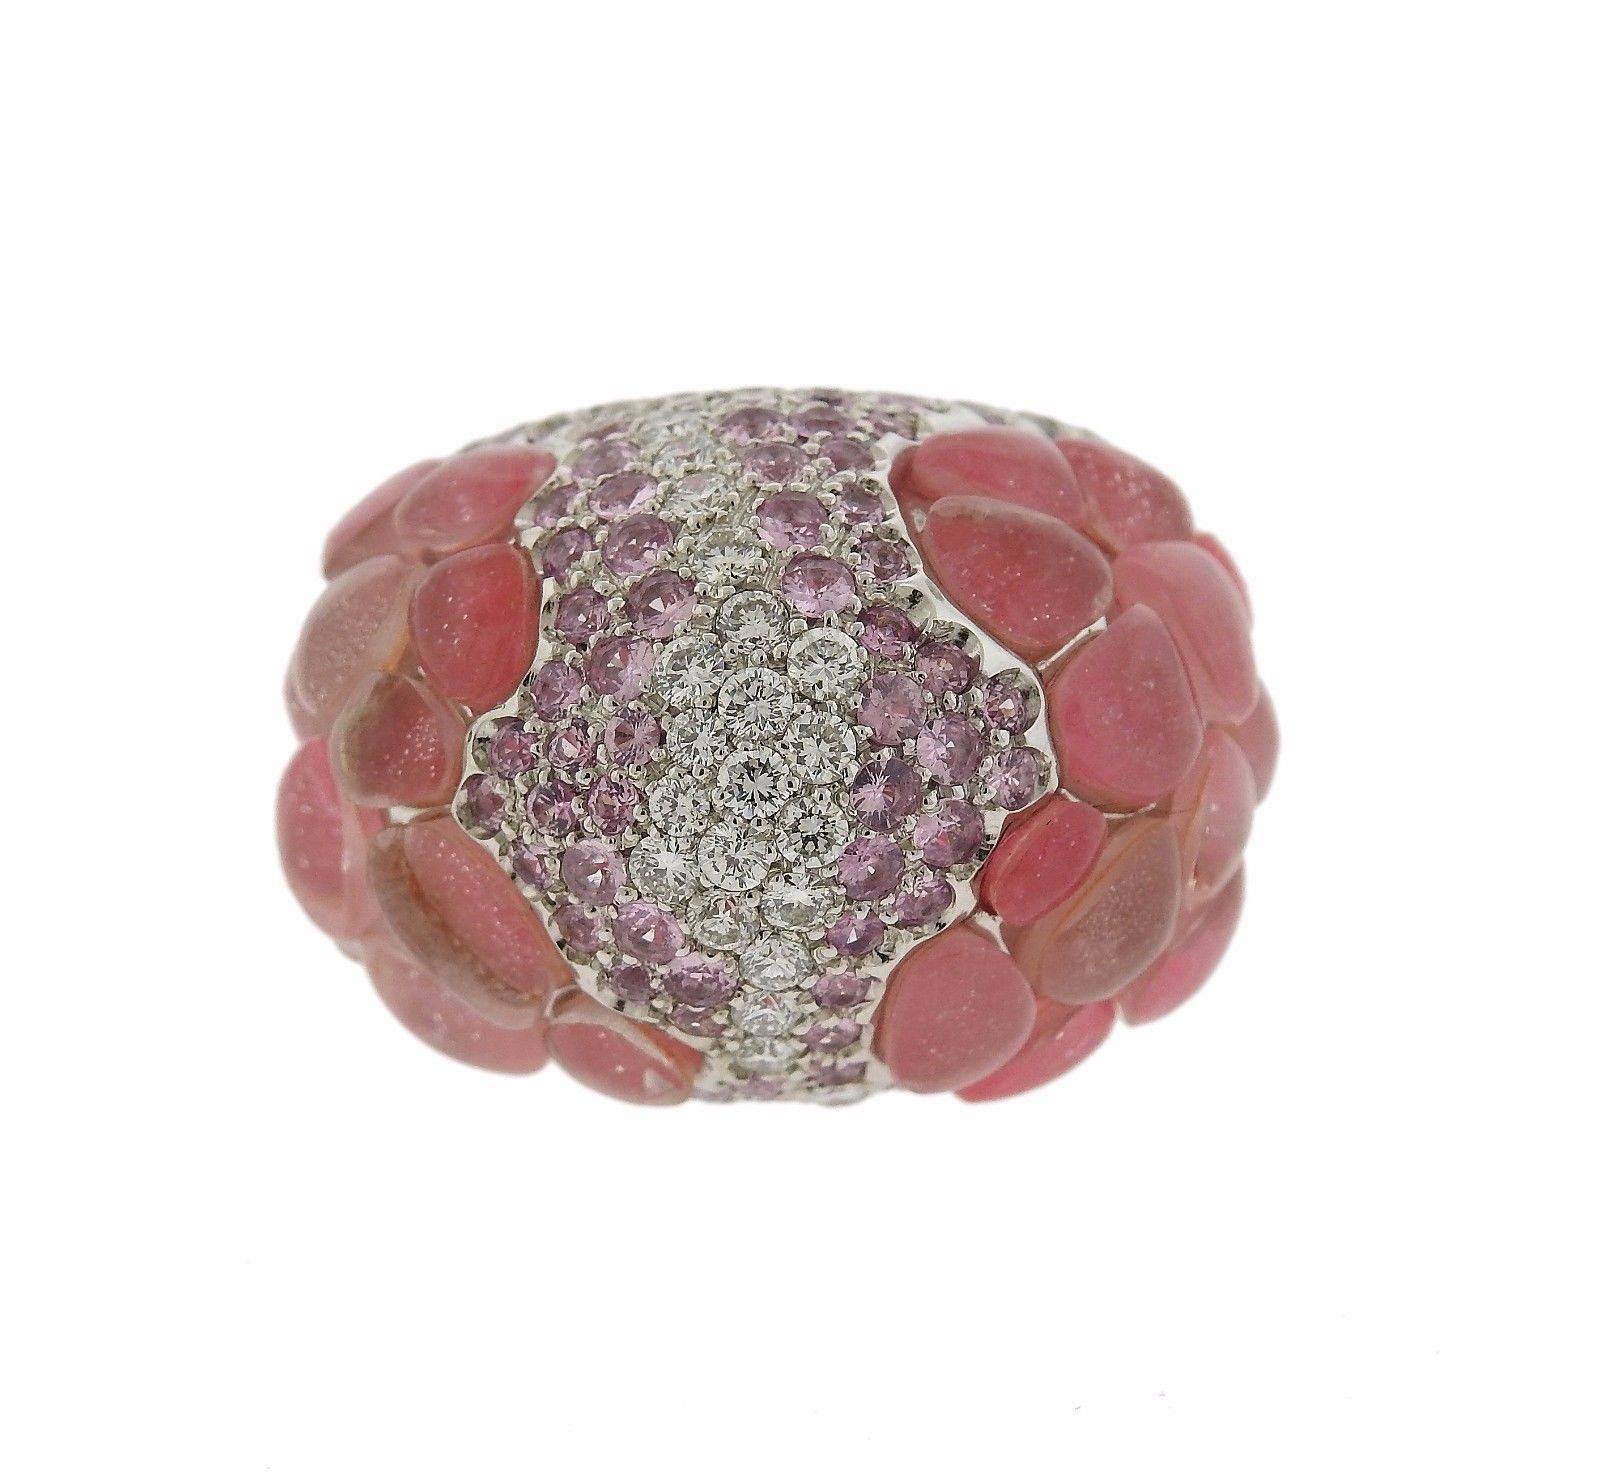 An 18k white gold ring set with pink sapphires and approximately 0.90ctw of G/VS diamonds.  The ring is a size 6 1/2, ring top is 20mm x 28mm.  The weight of the ring is 21.2 grams.  Marked: Porrati, 750, Italian marks. 